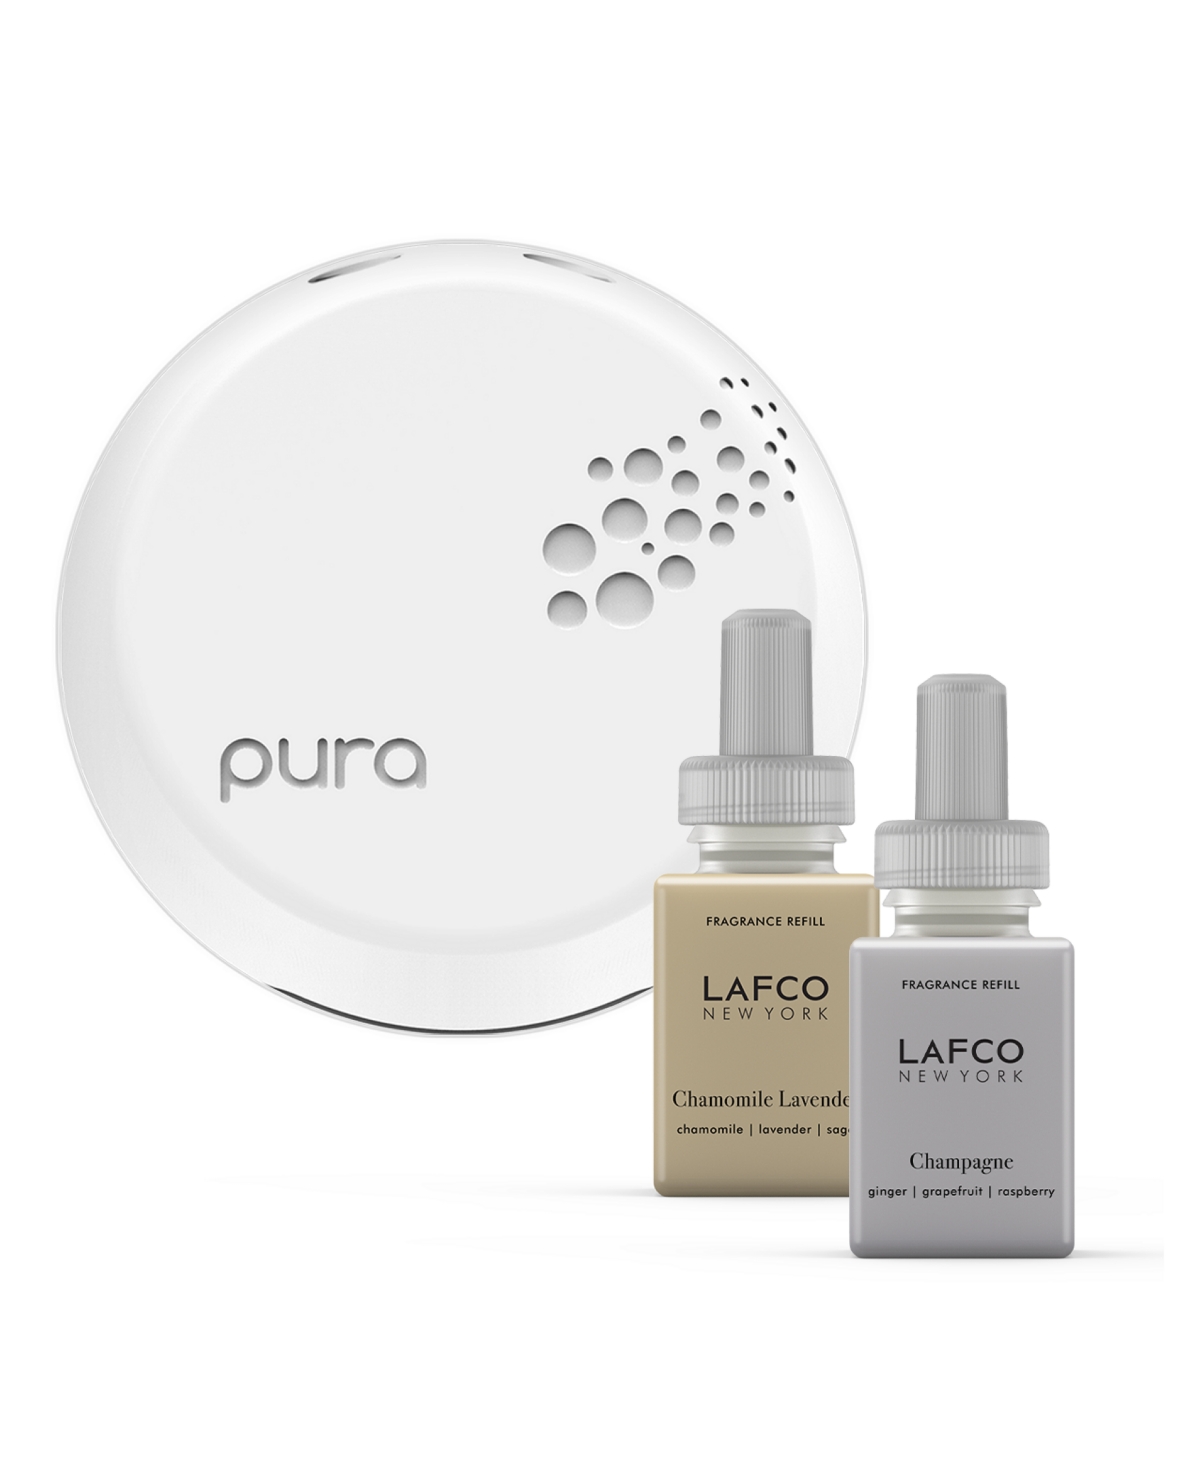 Pura Smart Home Fragrance Diffuser Set with Chamomile Lavender and Champagne